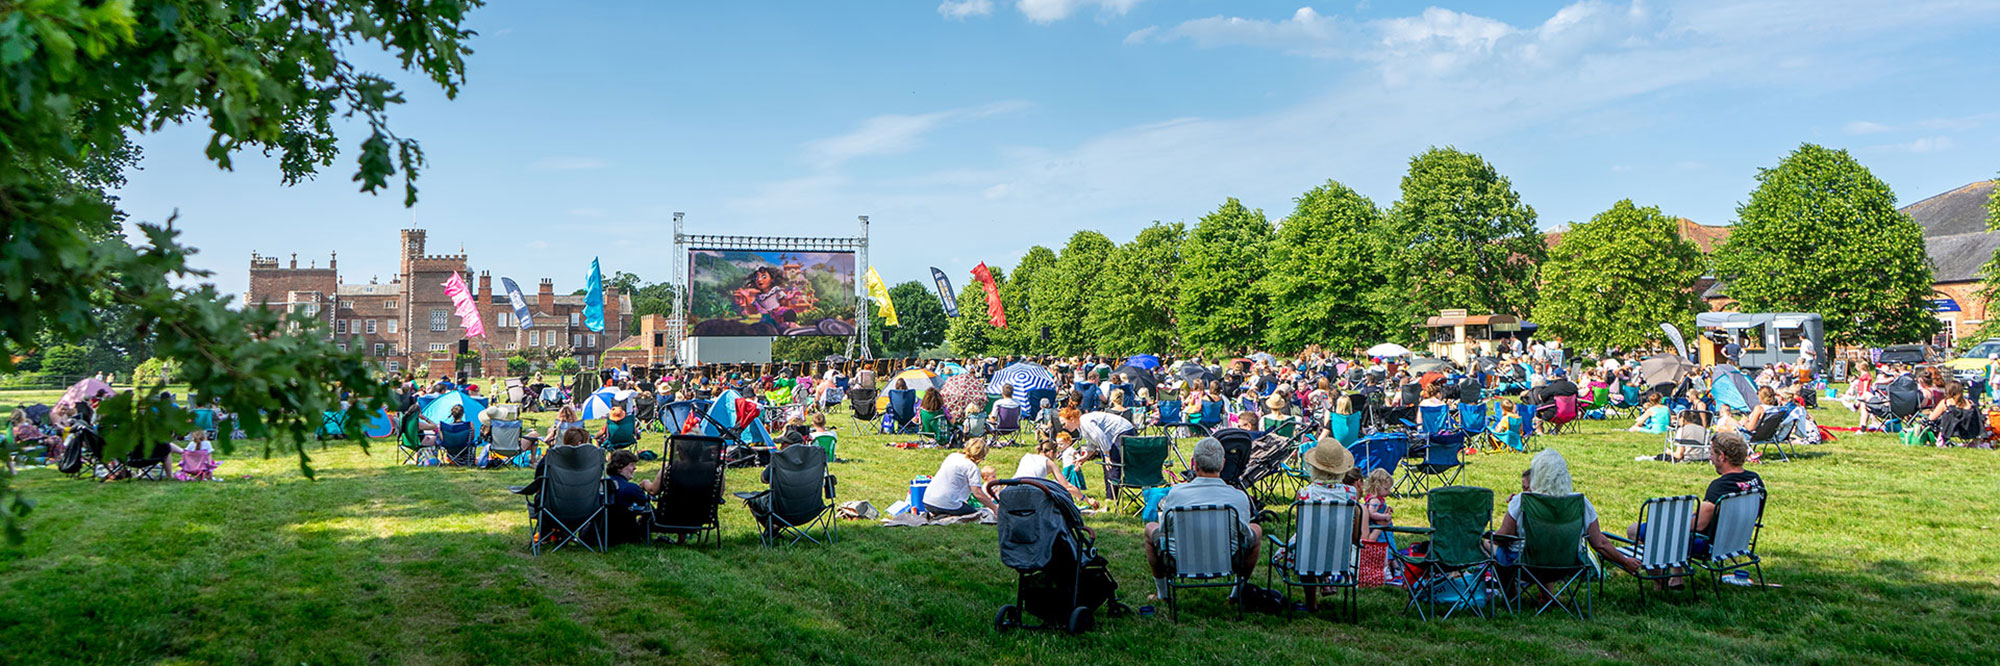 Outdoor cinema at Burton Constable Hall and Grounds